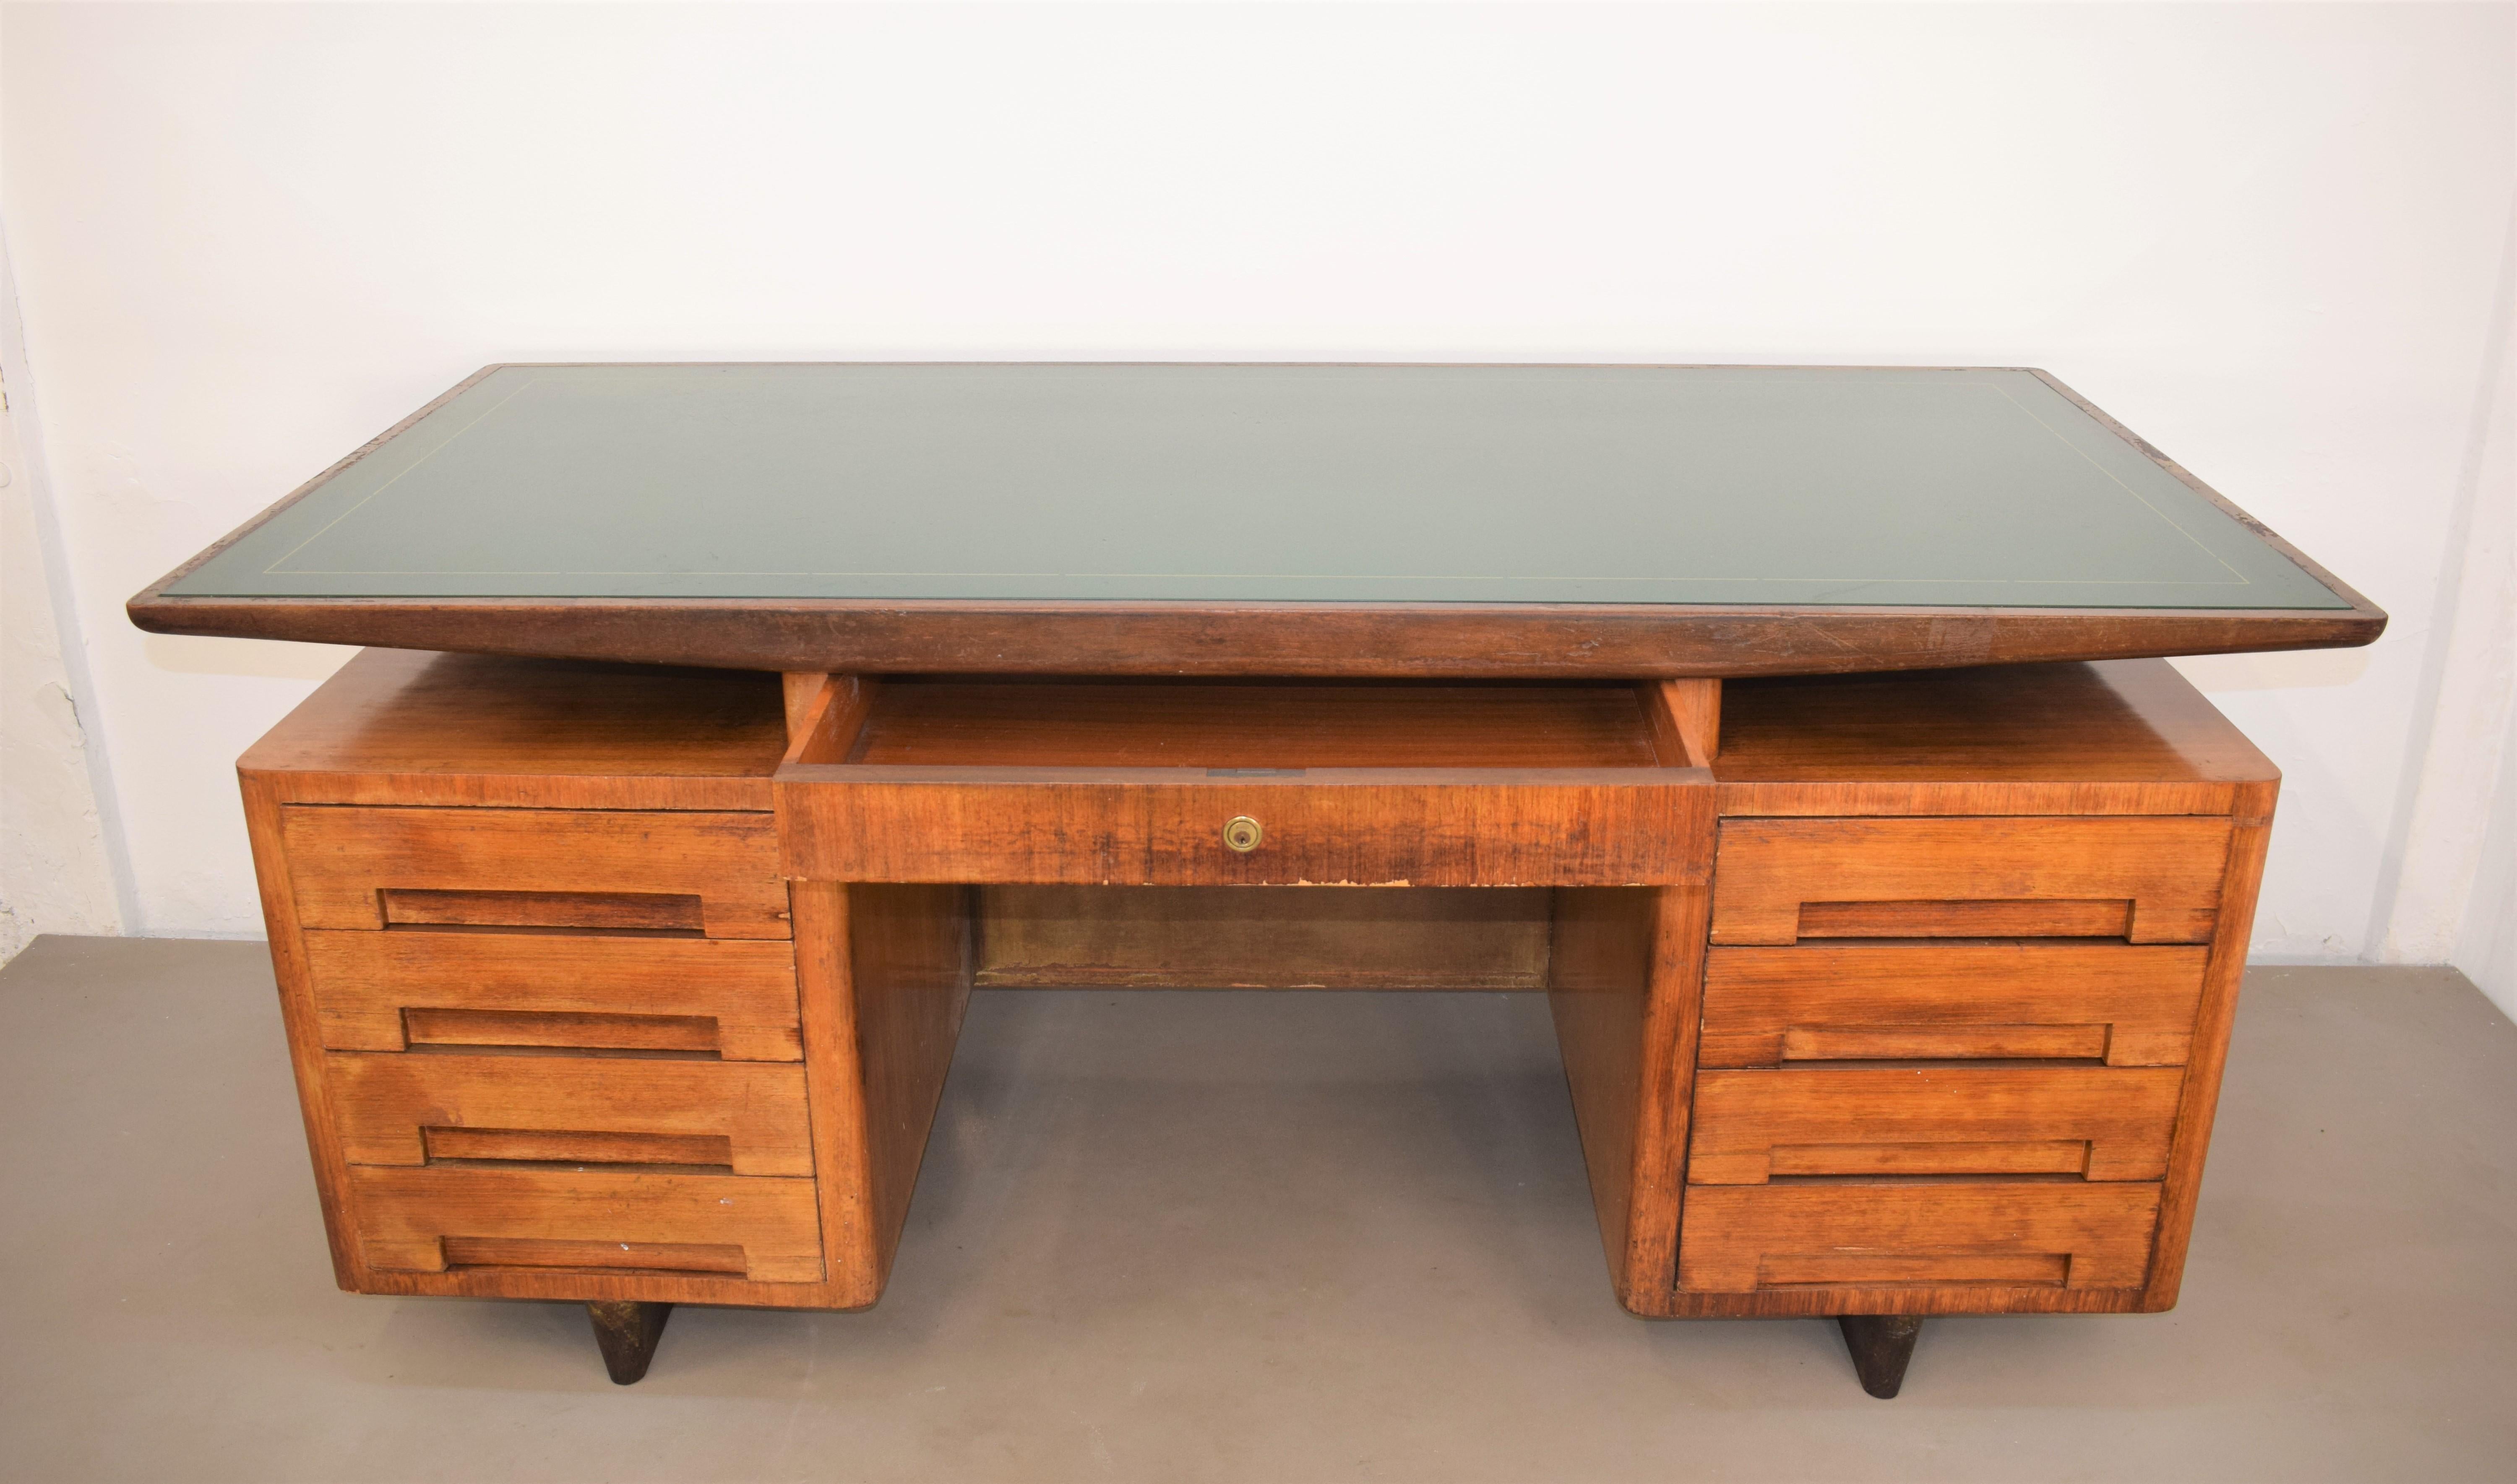 Glass Italian Desk by Gio Ponti Attributed, 1950s For Sale